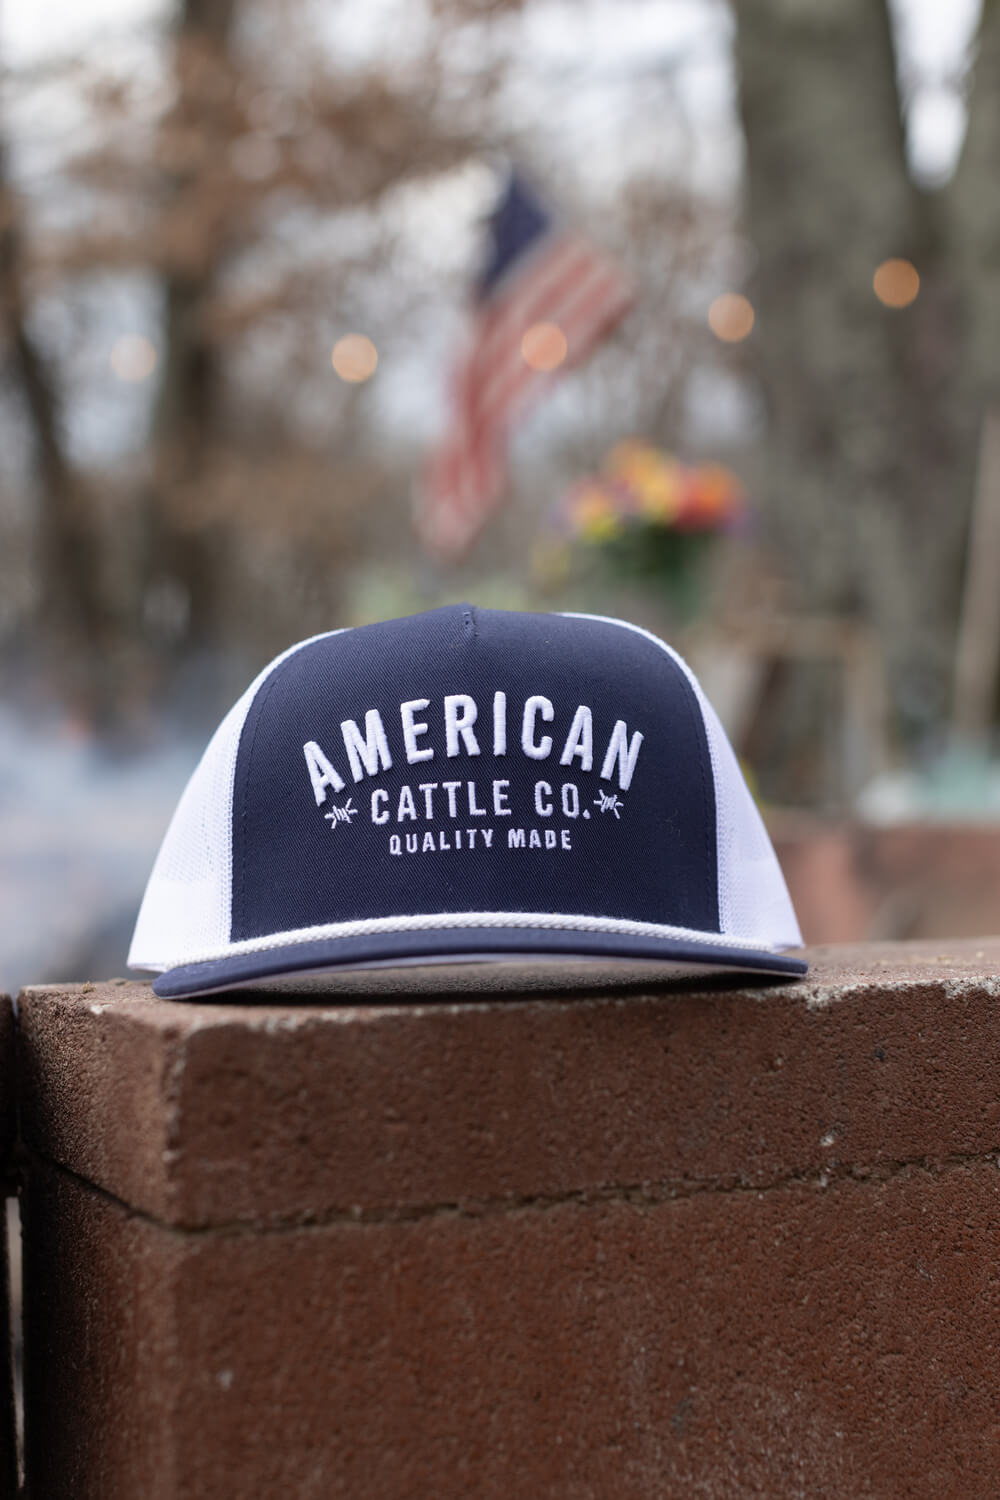 A Rural Cloth Quality Made Hat, distinguished by its navy and white trucker design and embroidered "AMERICAN CATTLE CO. QUALITY MADE" logo, rests on a brick ledge. The blurred background showcases an out-of-focus American flag amid a fuzzy outdoor setting. The hat includes a snapback closure for an adjustable fit.